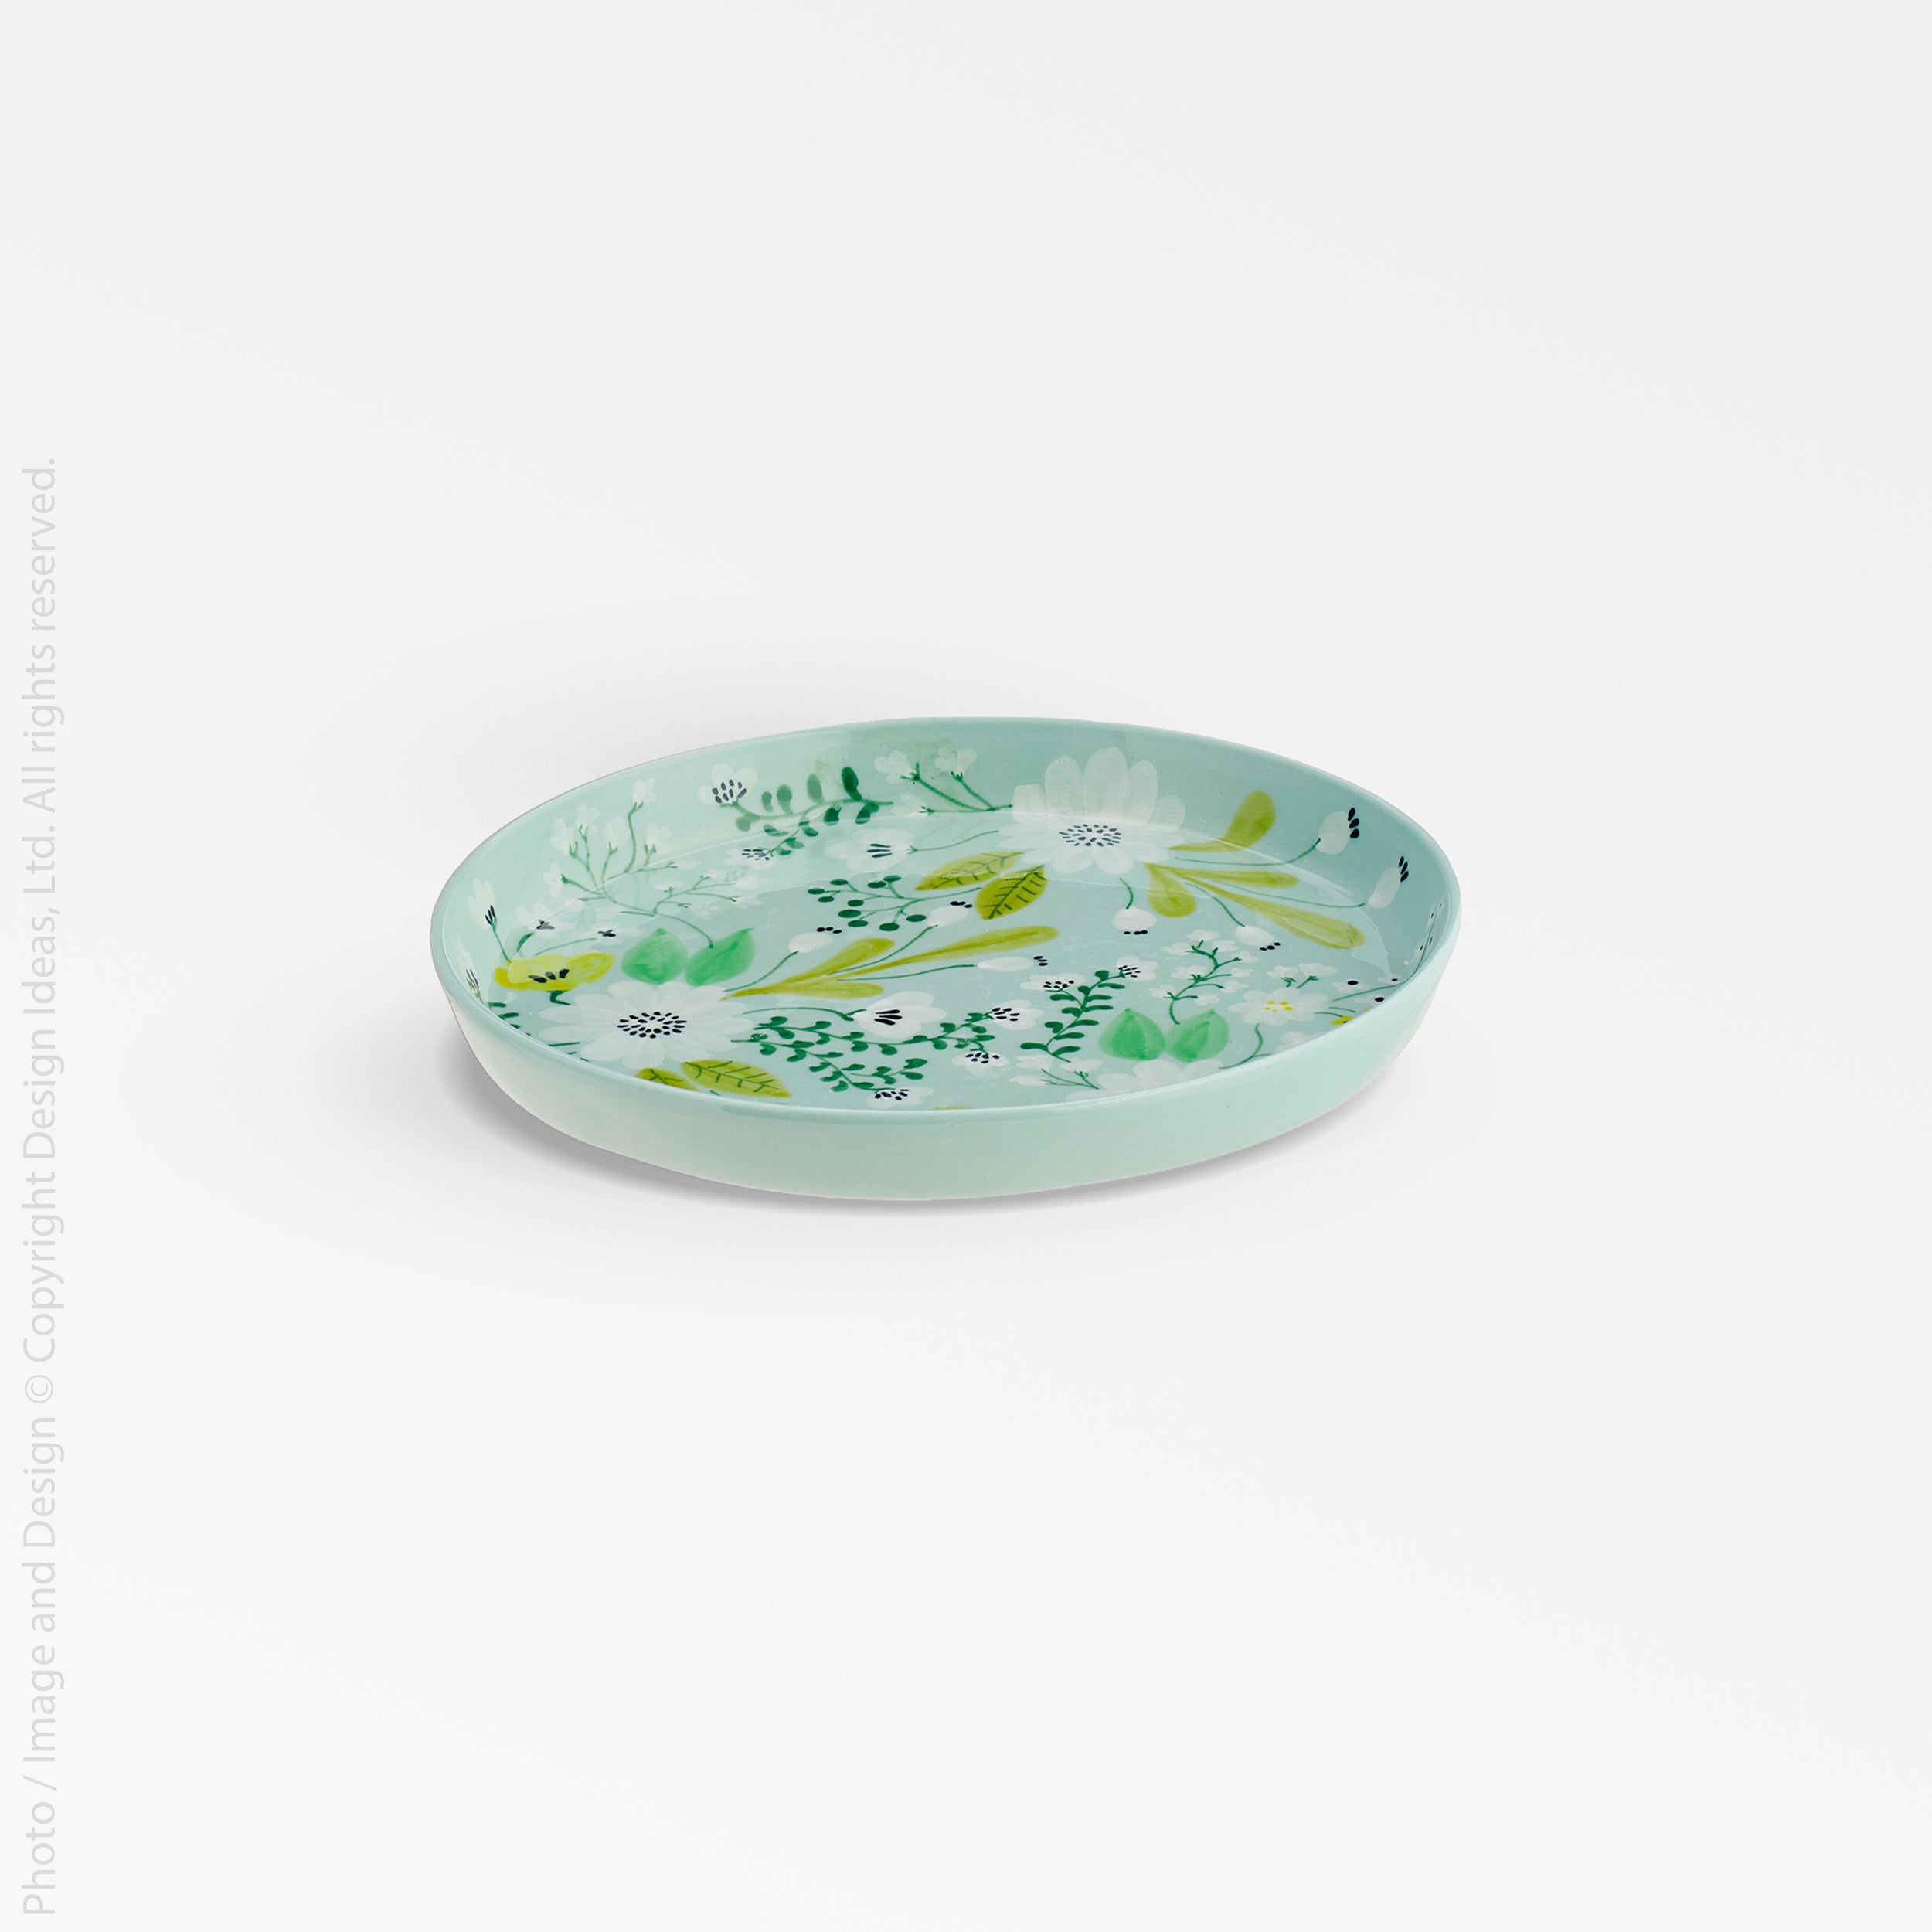 Bloomsbury™ plate - Mint | Image 1 | Premium Plate from the Bloomsbury collection | made with Kaolin clay for long lasting use | texxture